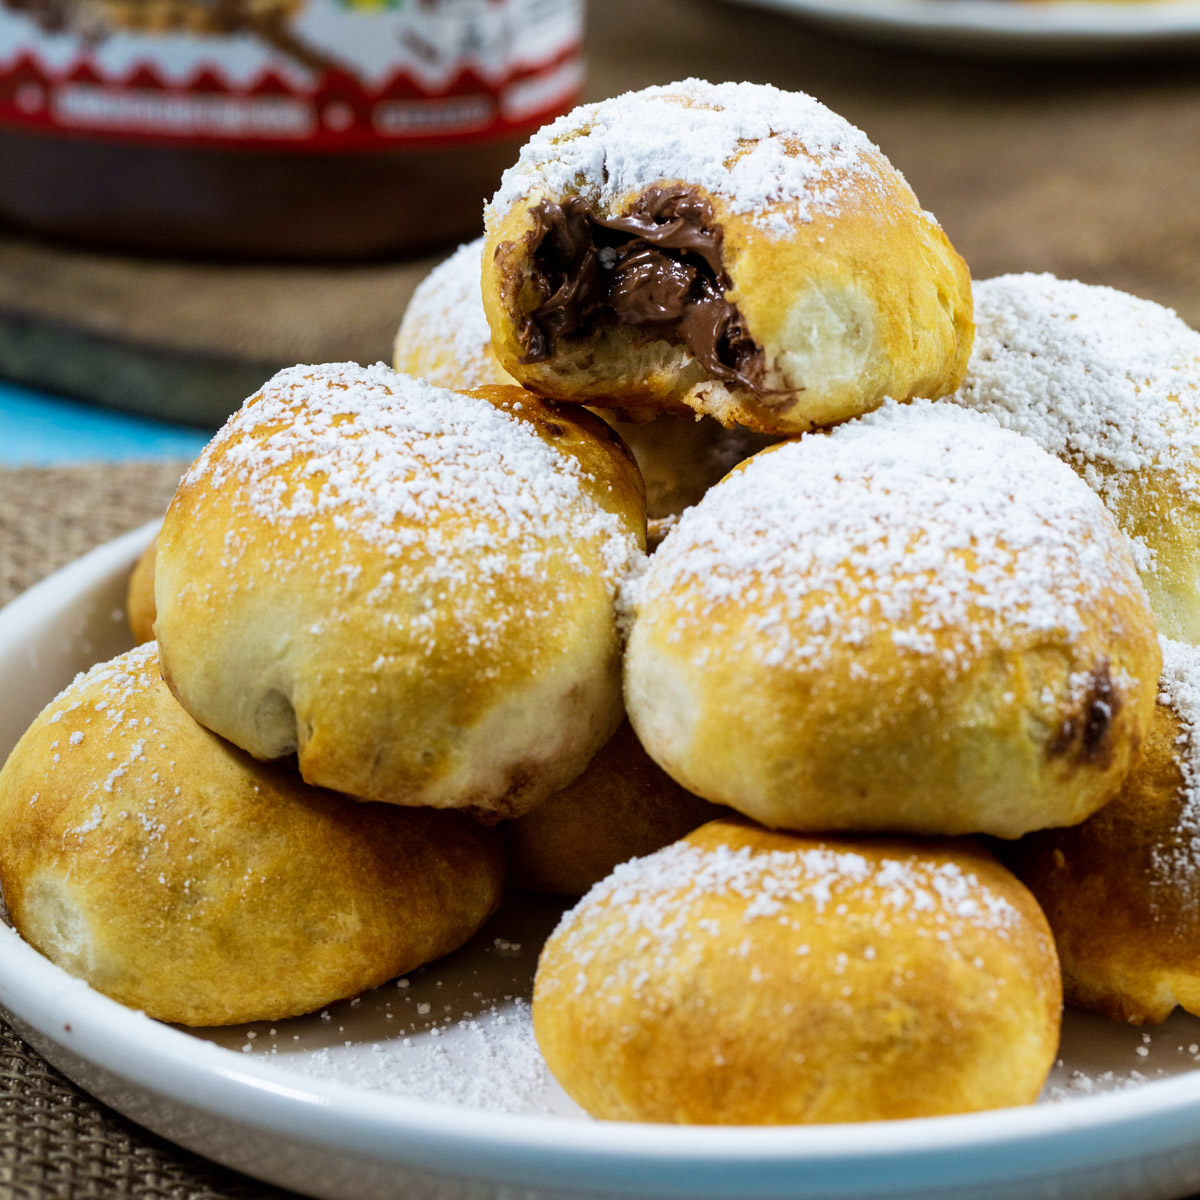 Air Fryer Nutella Bombs stacked on a plate.